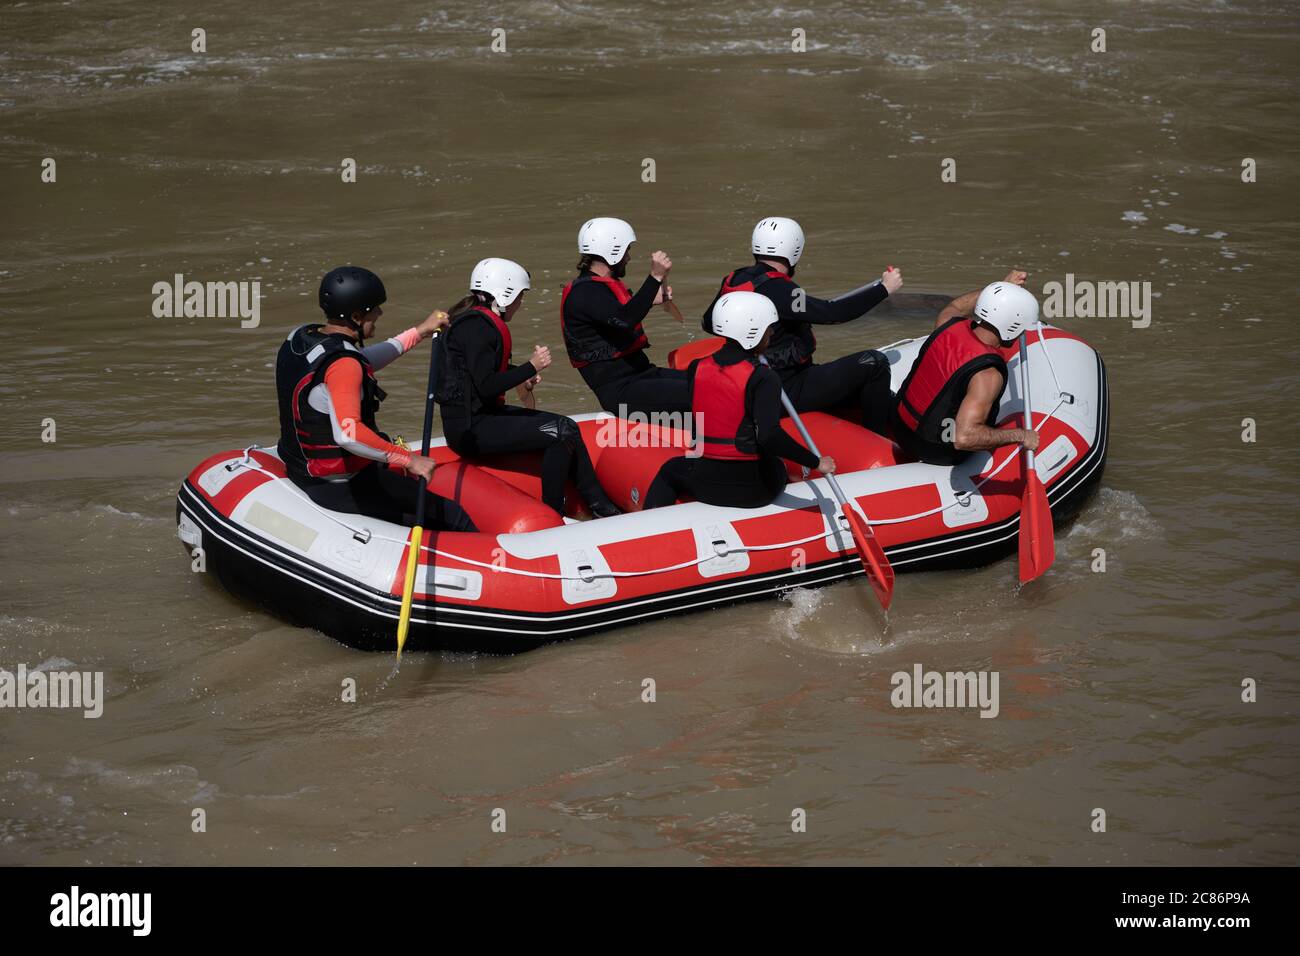 Rafting team members and instructor rowing in their boat down the murky river during a summer day. Practiging water sports can be good for your streng Stock Photo